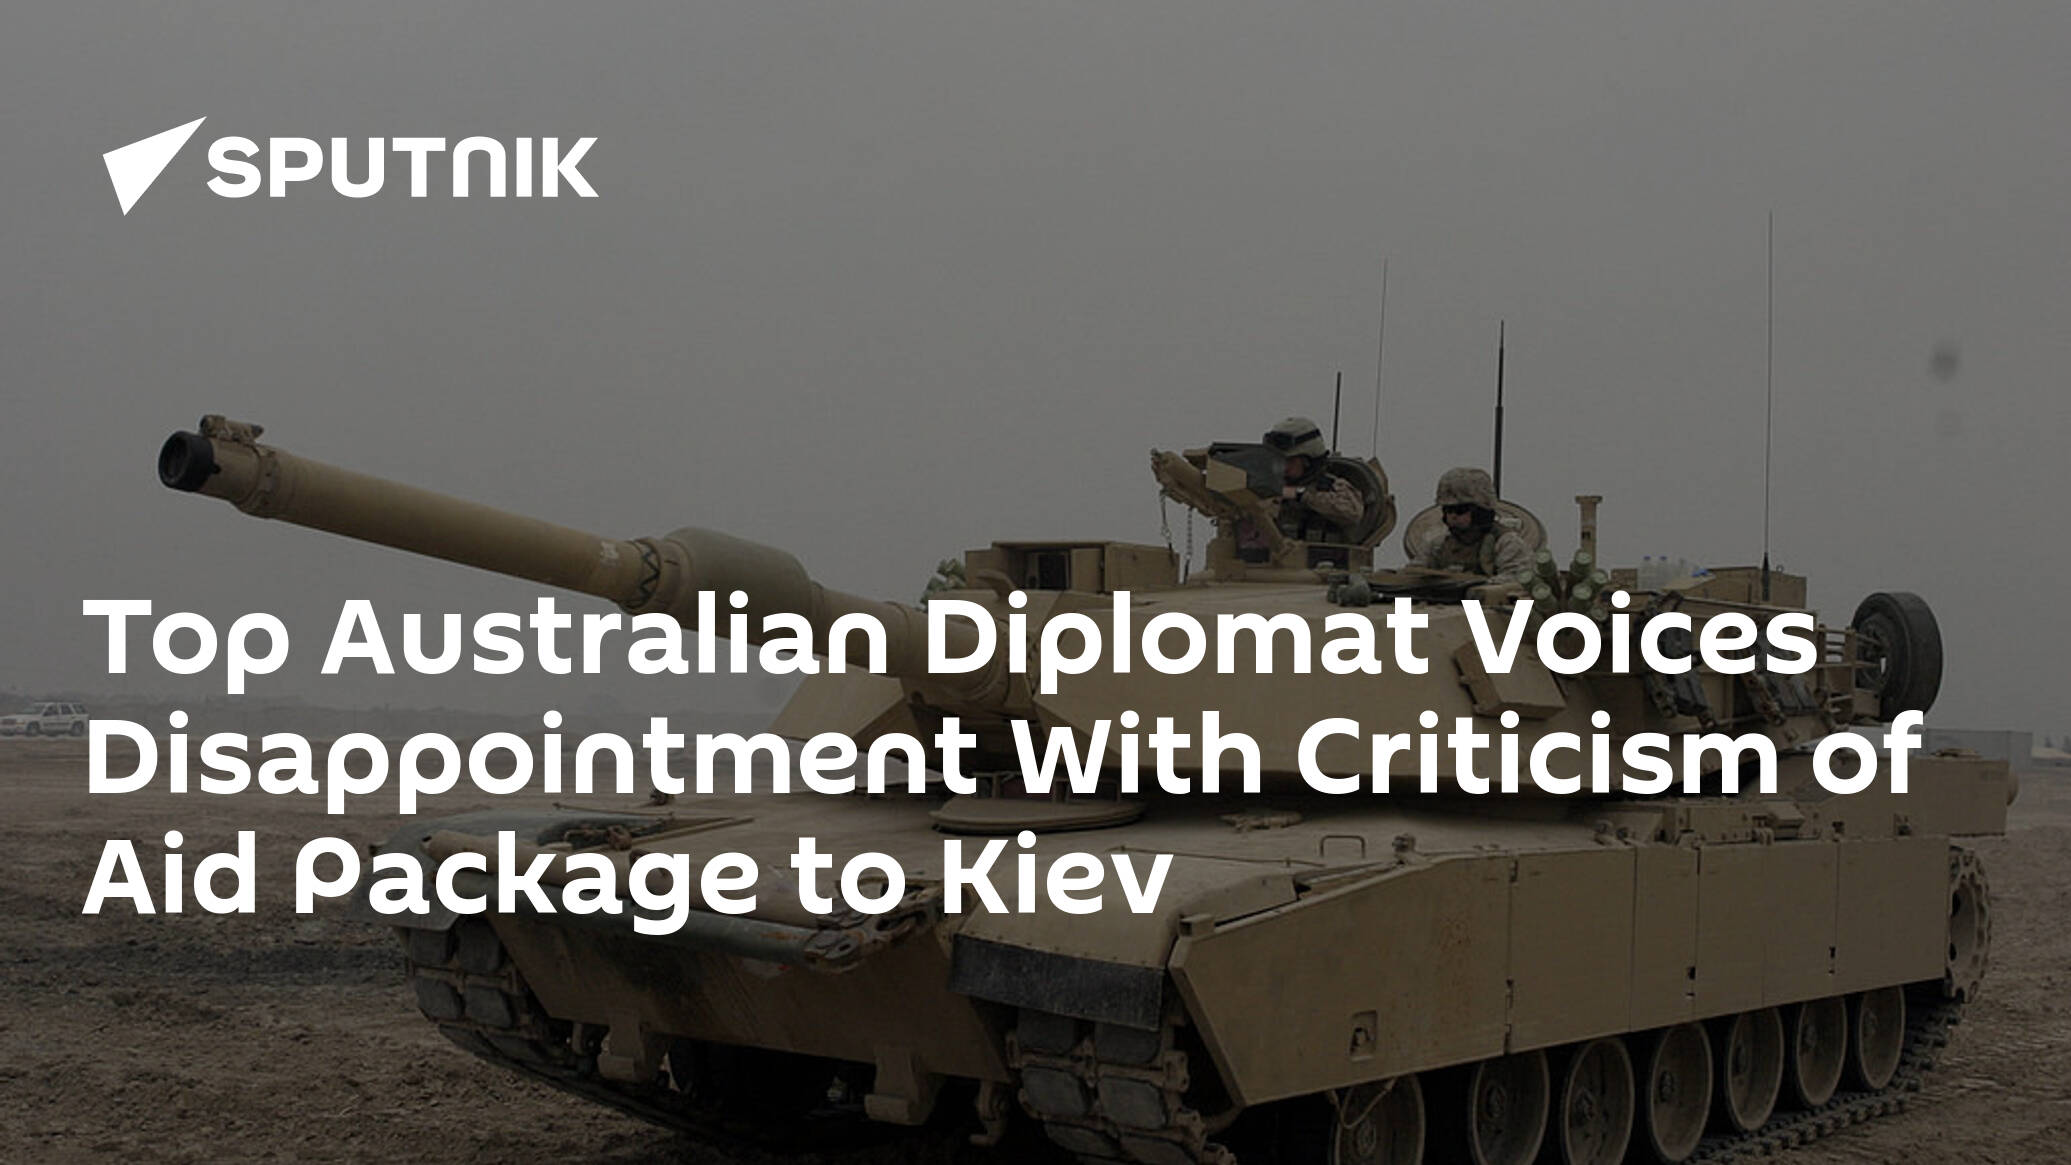 Top Australian Diplomat Voices Disappointment With Criticism of Aid Package to Kiev